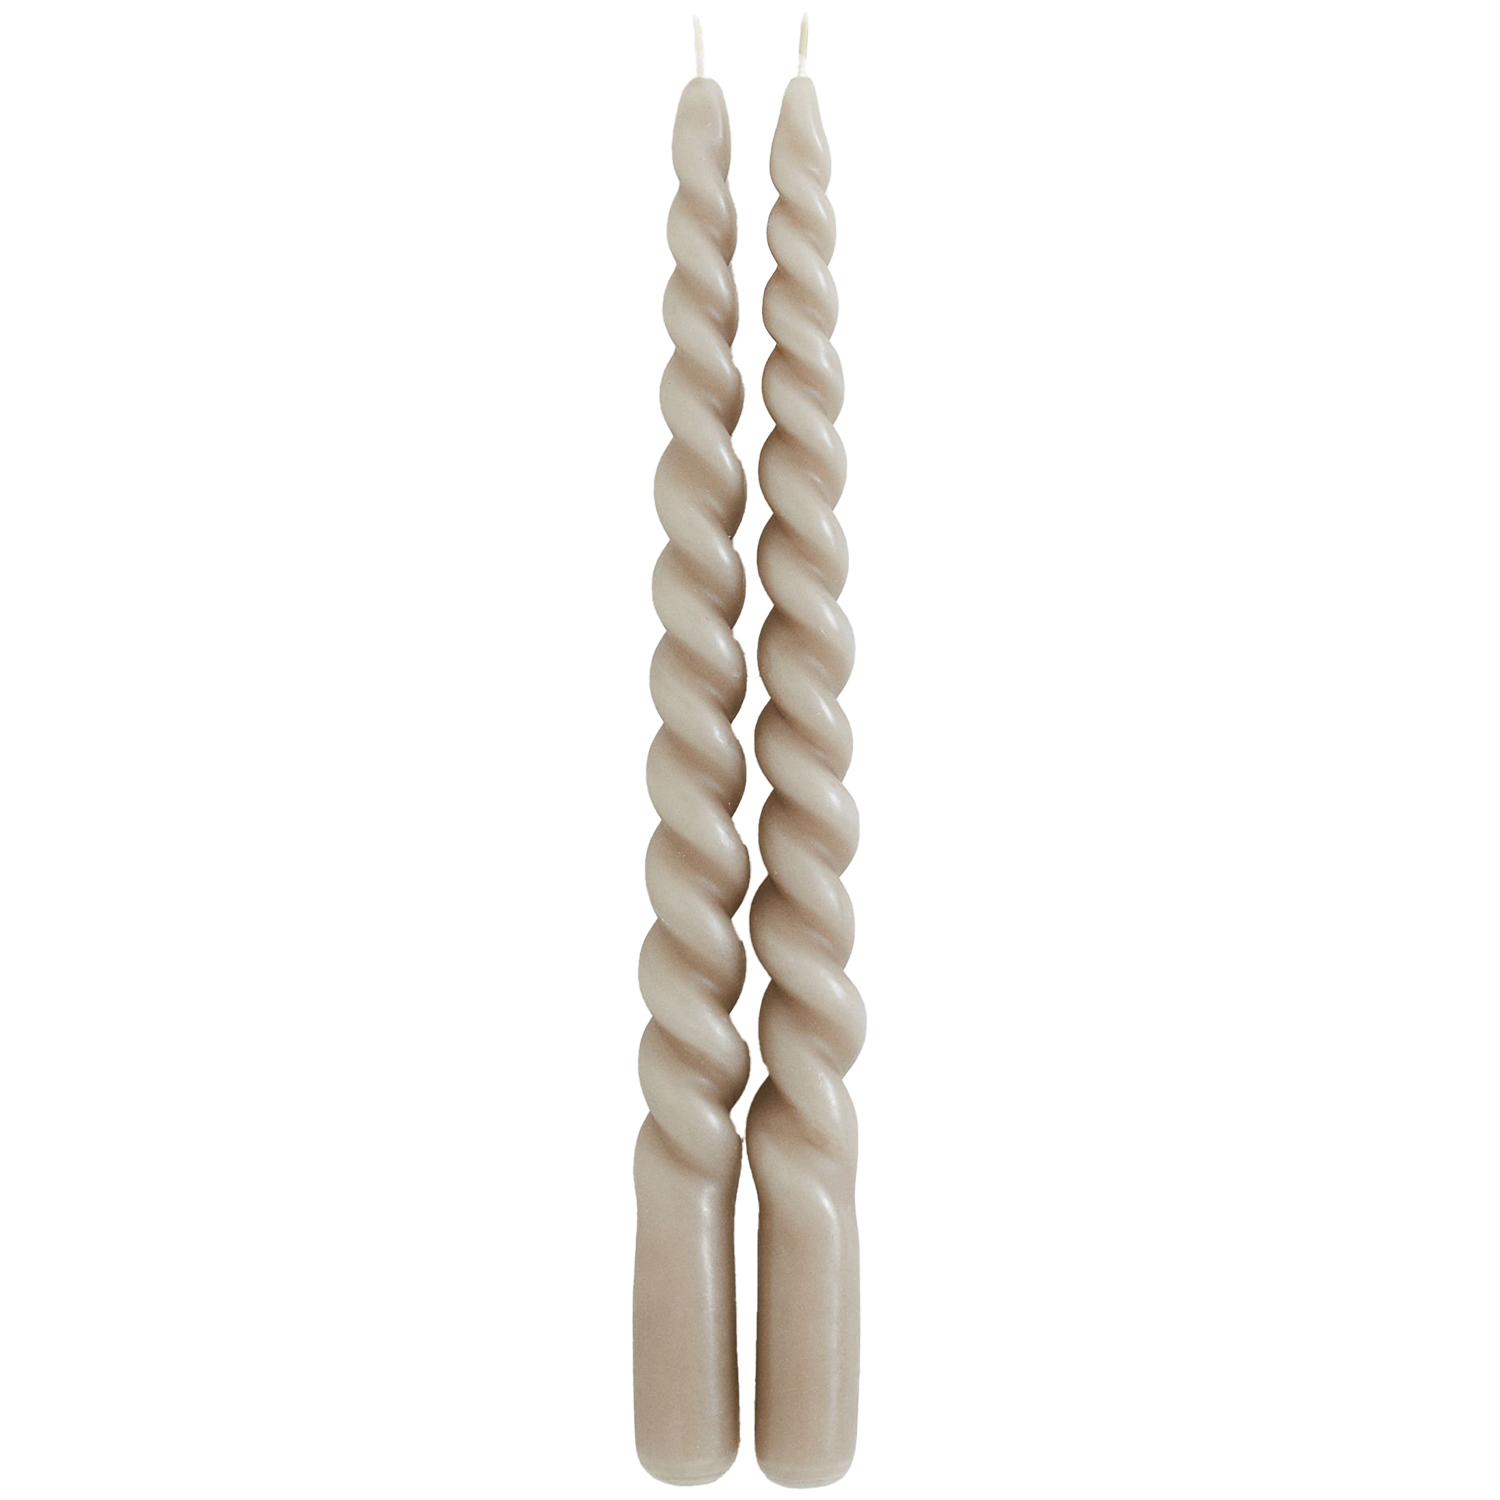 H&M Home 2-pack Spiral Candles.